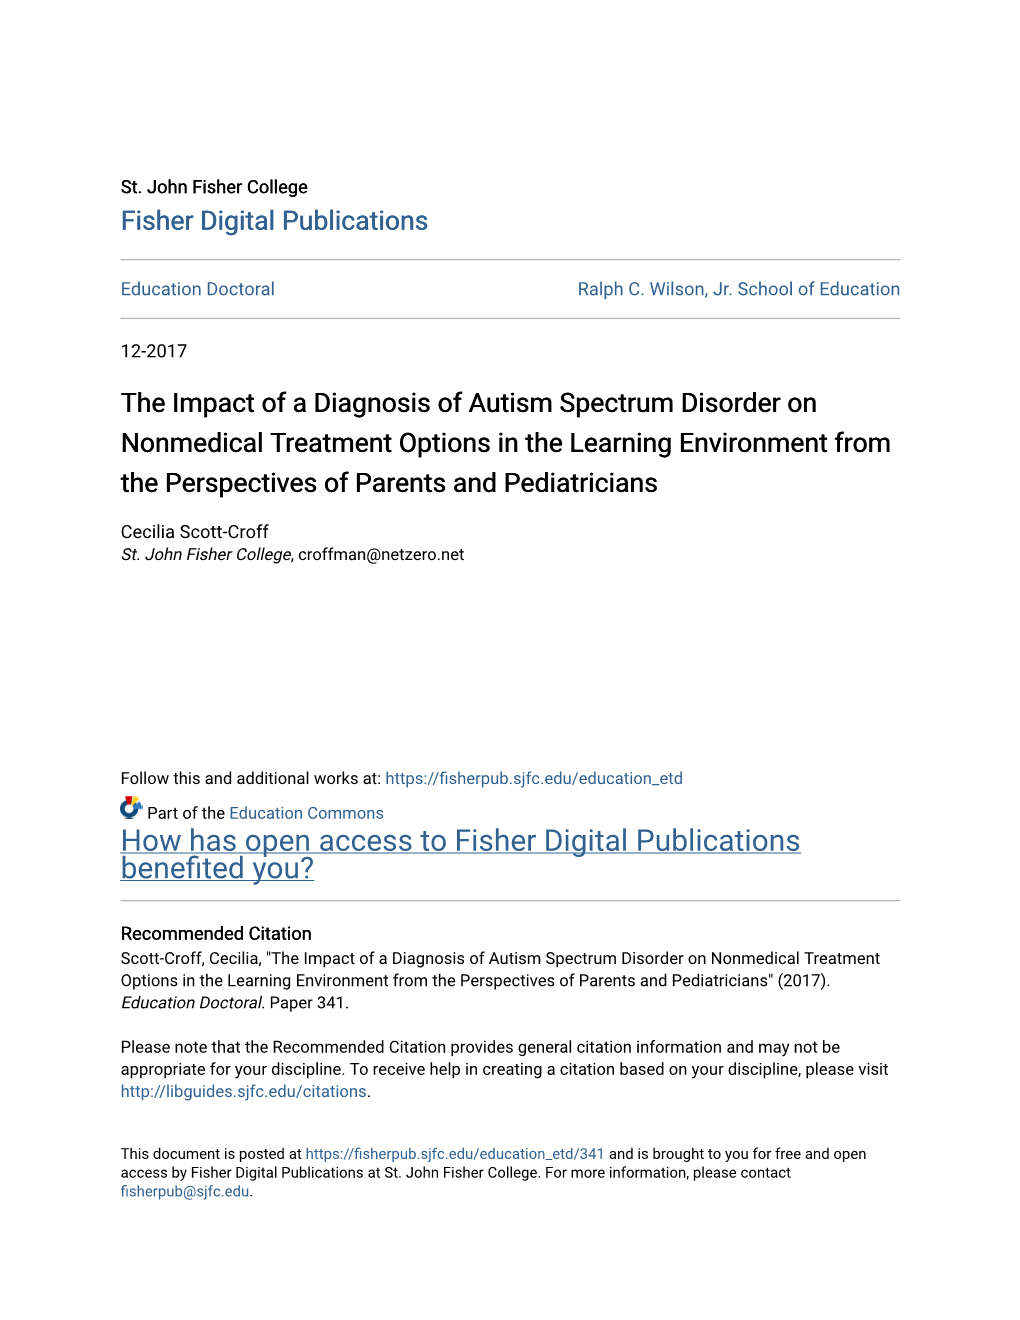 The Impact of a Diagnosis of Autism Spectrum Disorder on Nonmedical Treatment Options in the Learning Environment from the Perspectives of Parents and Pediatricians